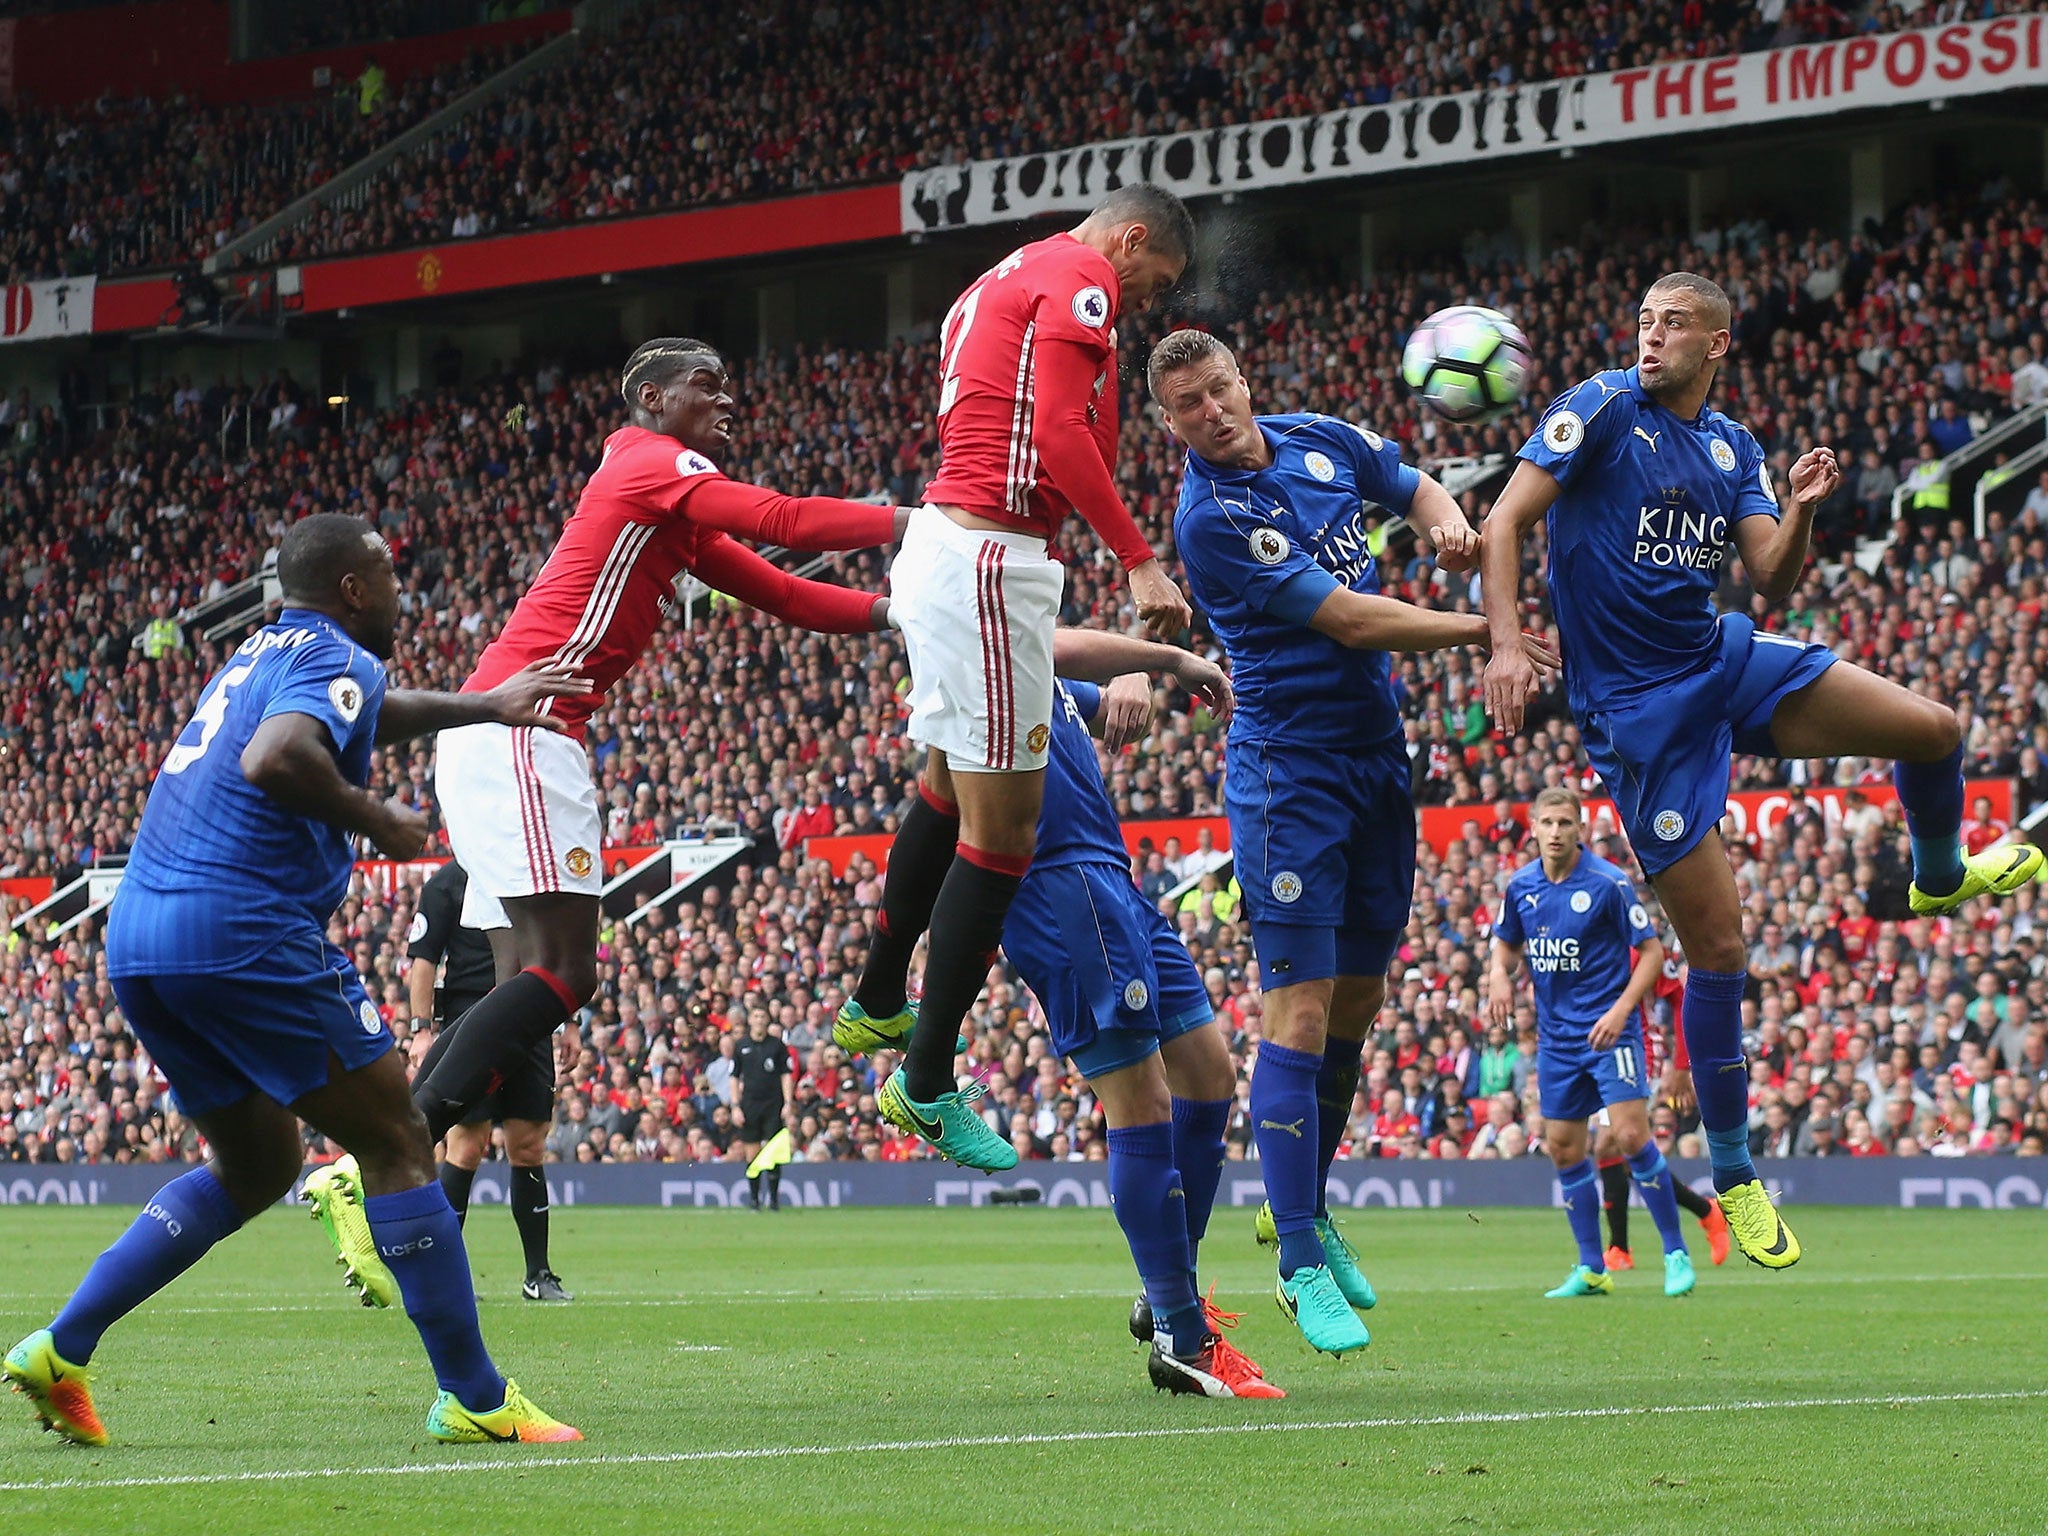 Leicester struggled with their set-piece defending against United on Saturday